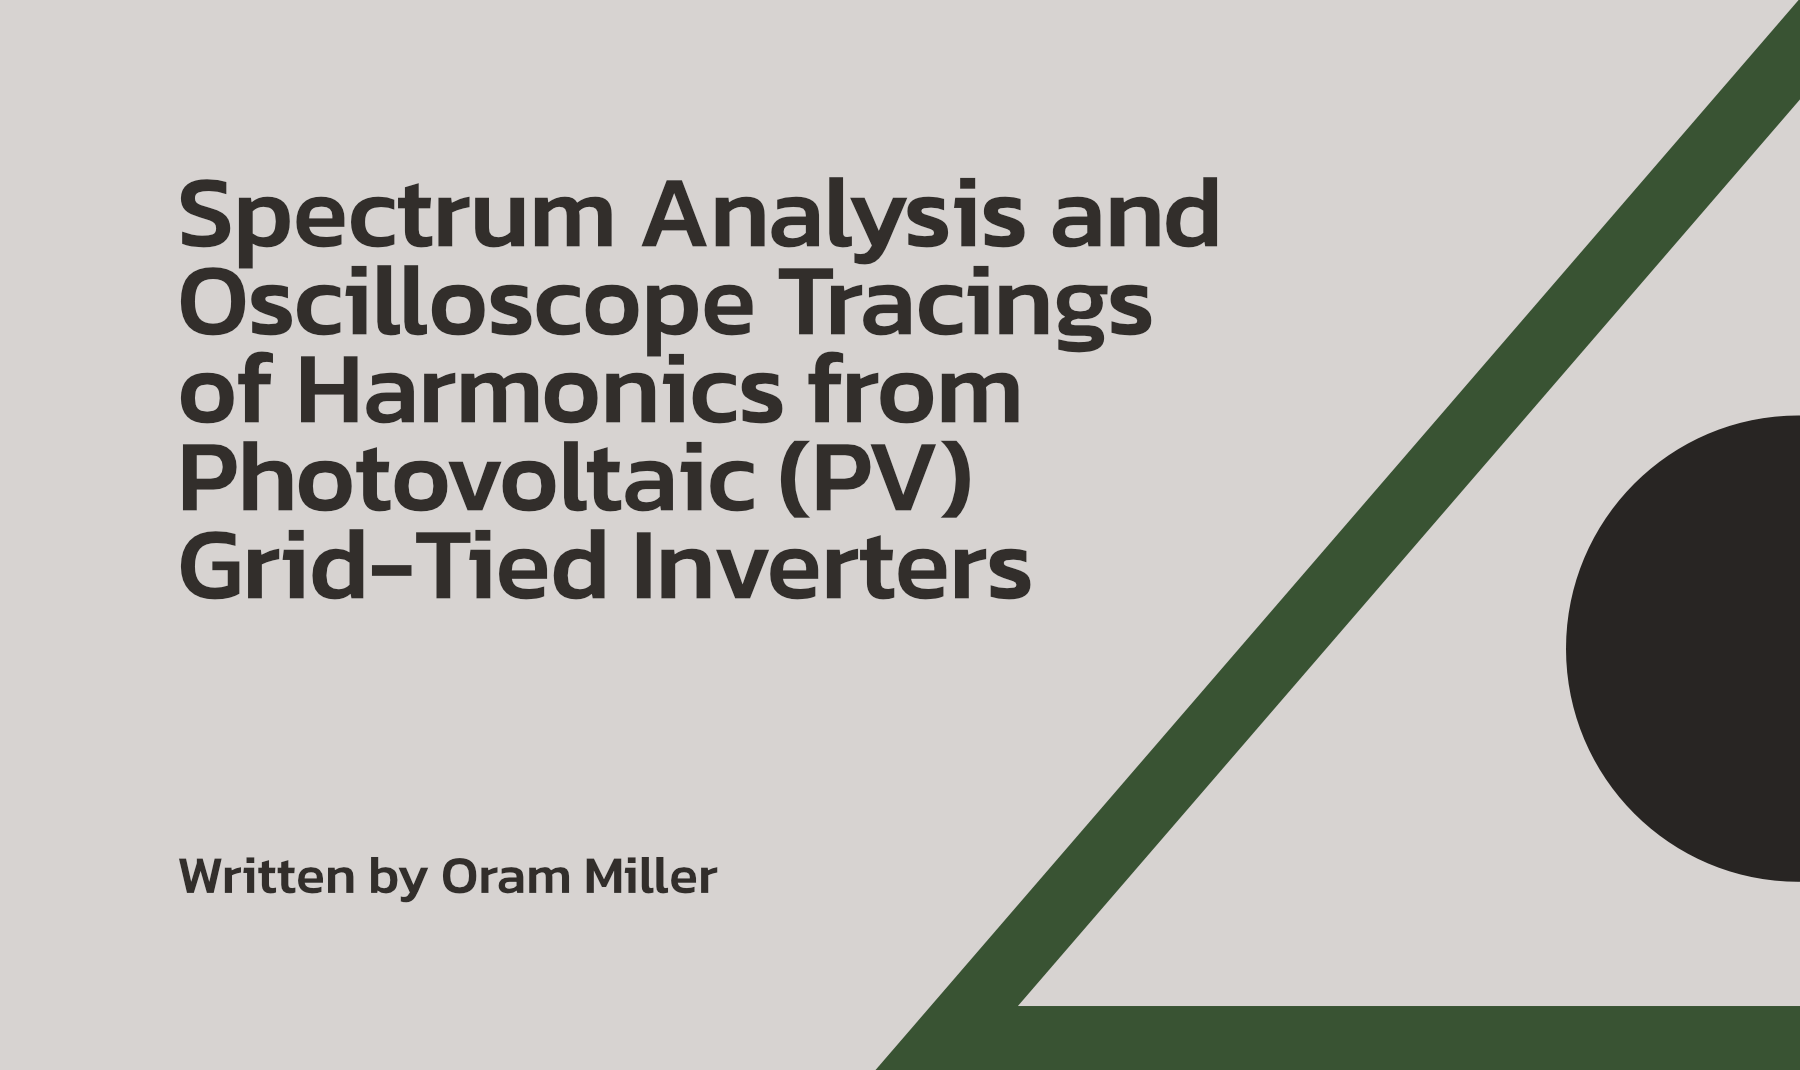 Spectrum Analysis and Oscilloscope Tracings of Harmonics from Photovoltaic (PV) Grid-Tied Inverters